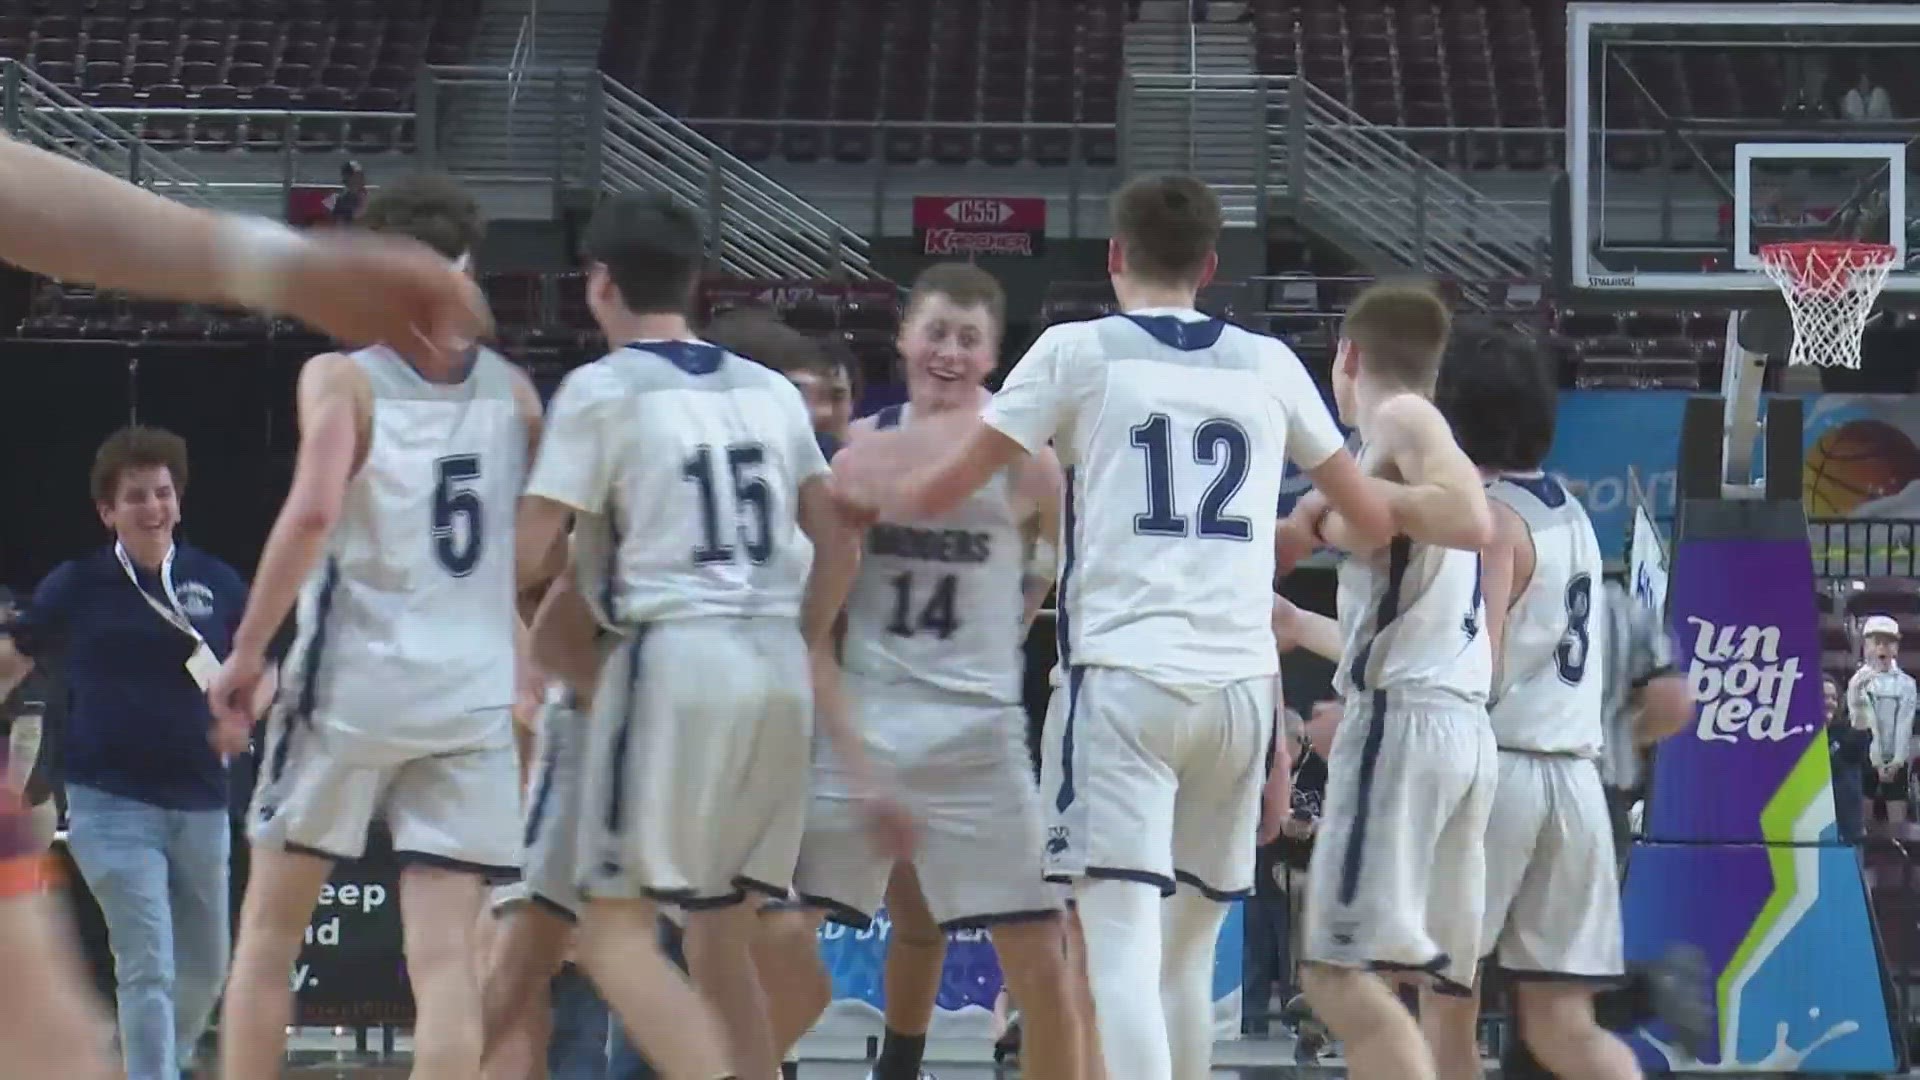 The Badgers topped Teton 54-47 in the Idaho 3A state title game.